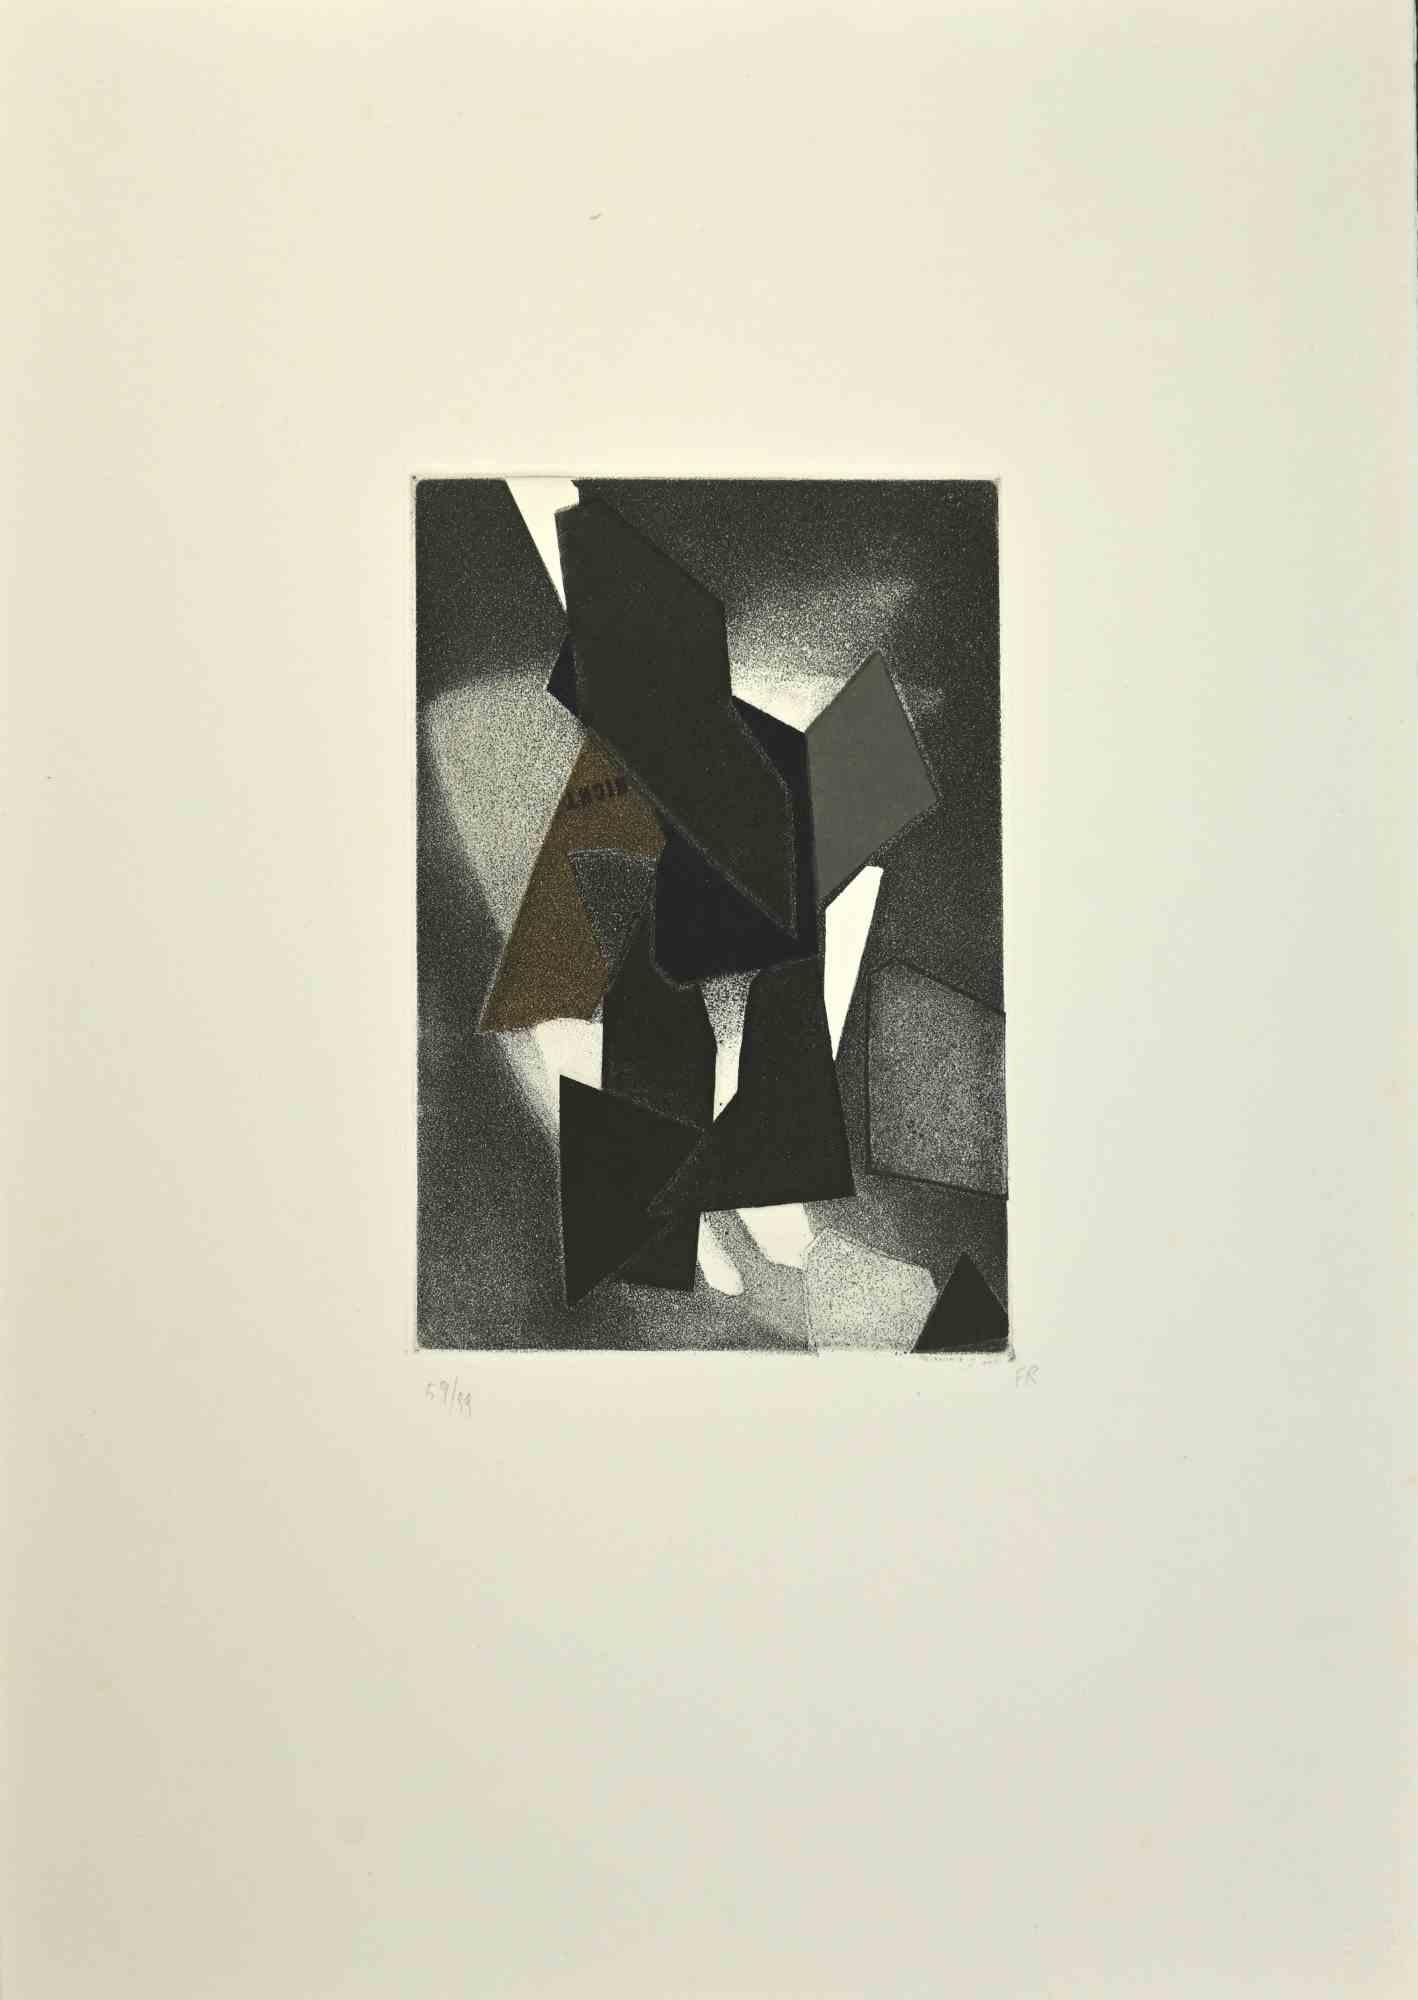 Untitled - Etching and Collage by Hans Richter - 1973